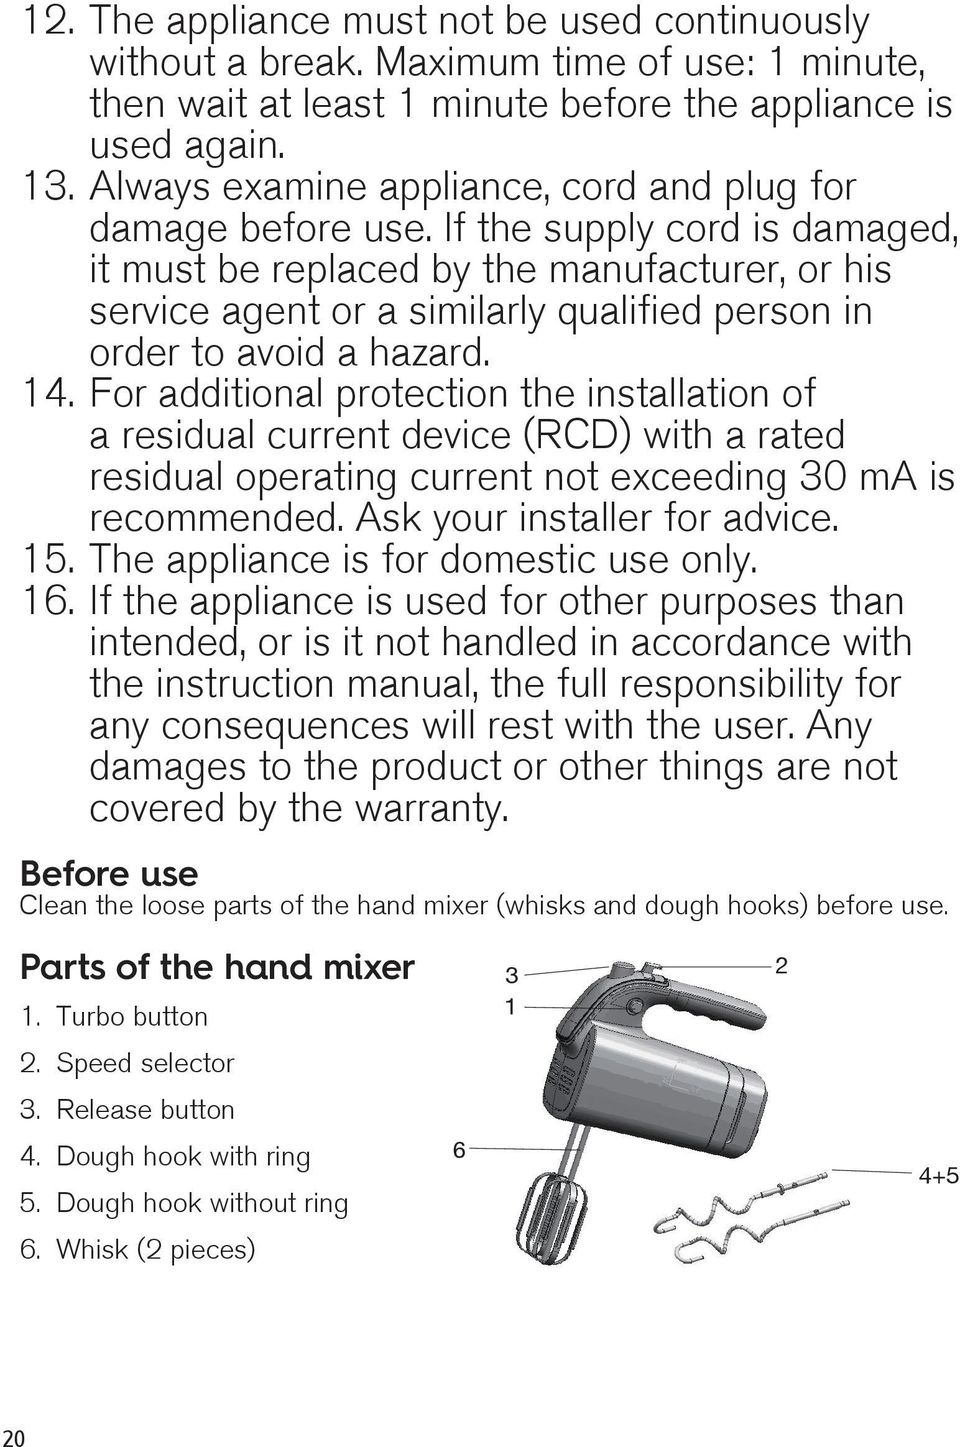 If the supply cord is damaged, it must be replaced by the manufacturer, or his service agent or a similarly qualified person in order to avoid a hazard. 14.